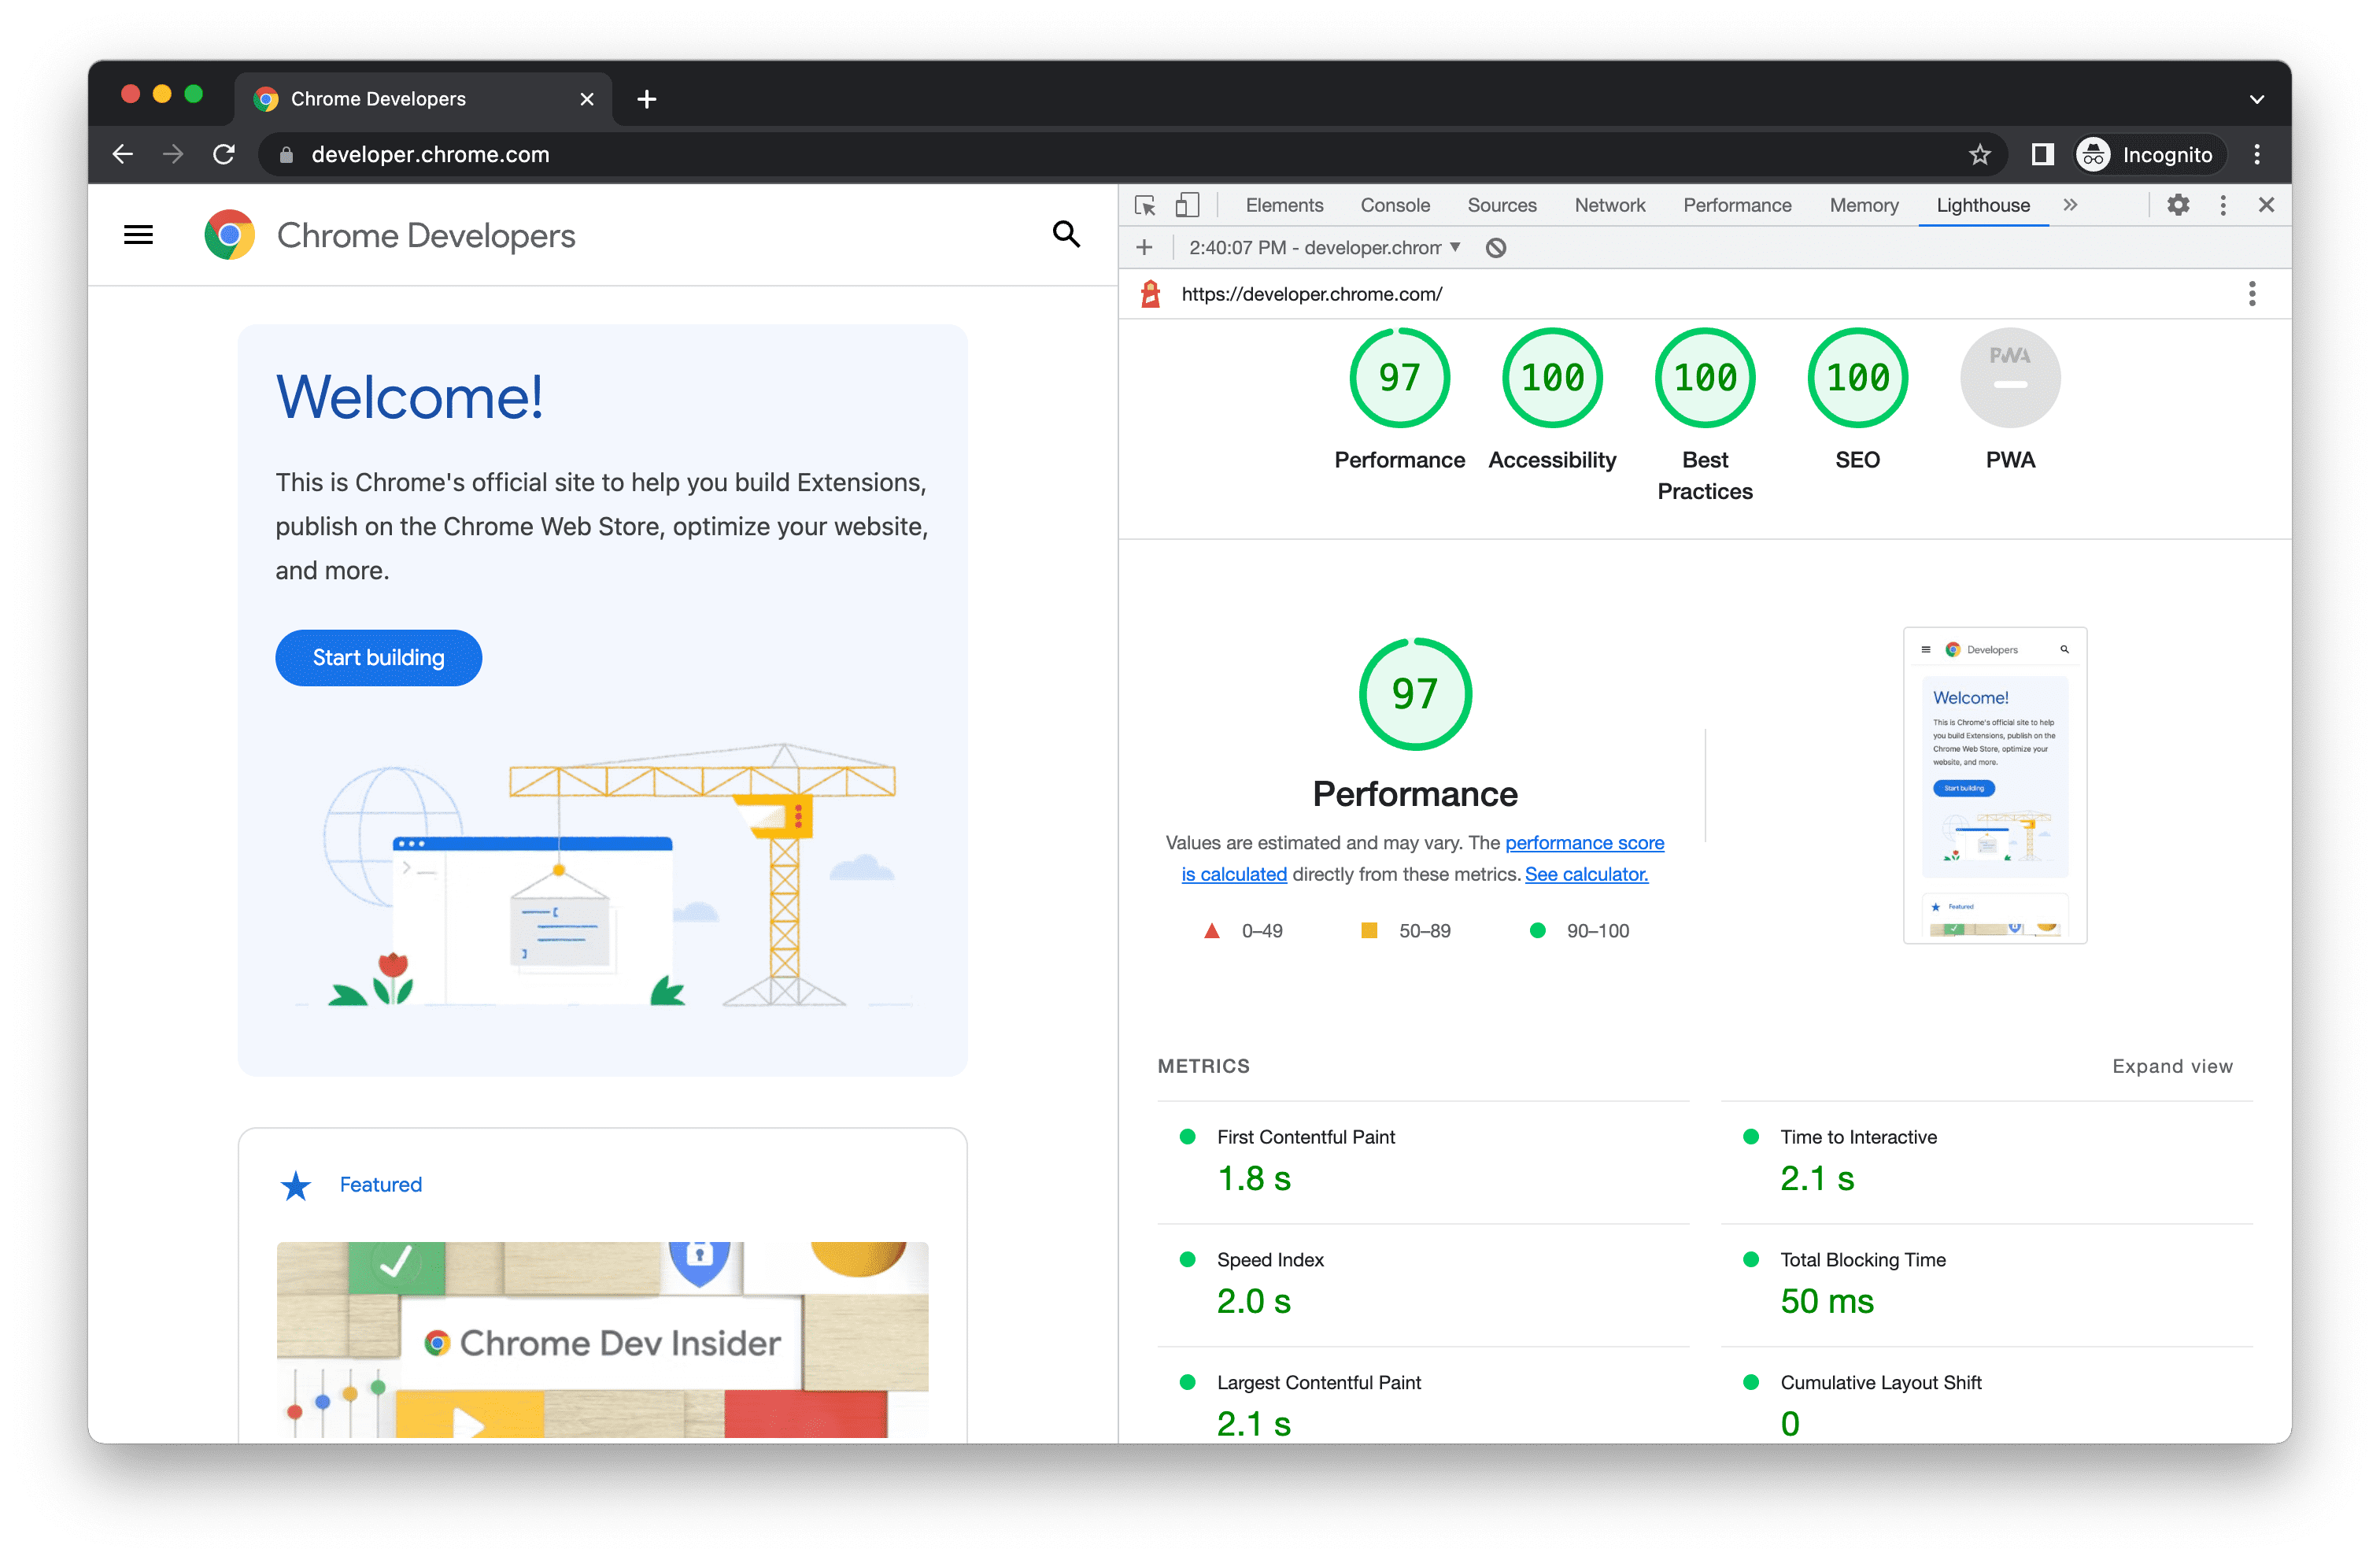 A Lighthouse report in Chrome DevTools